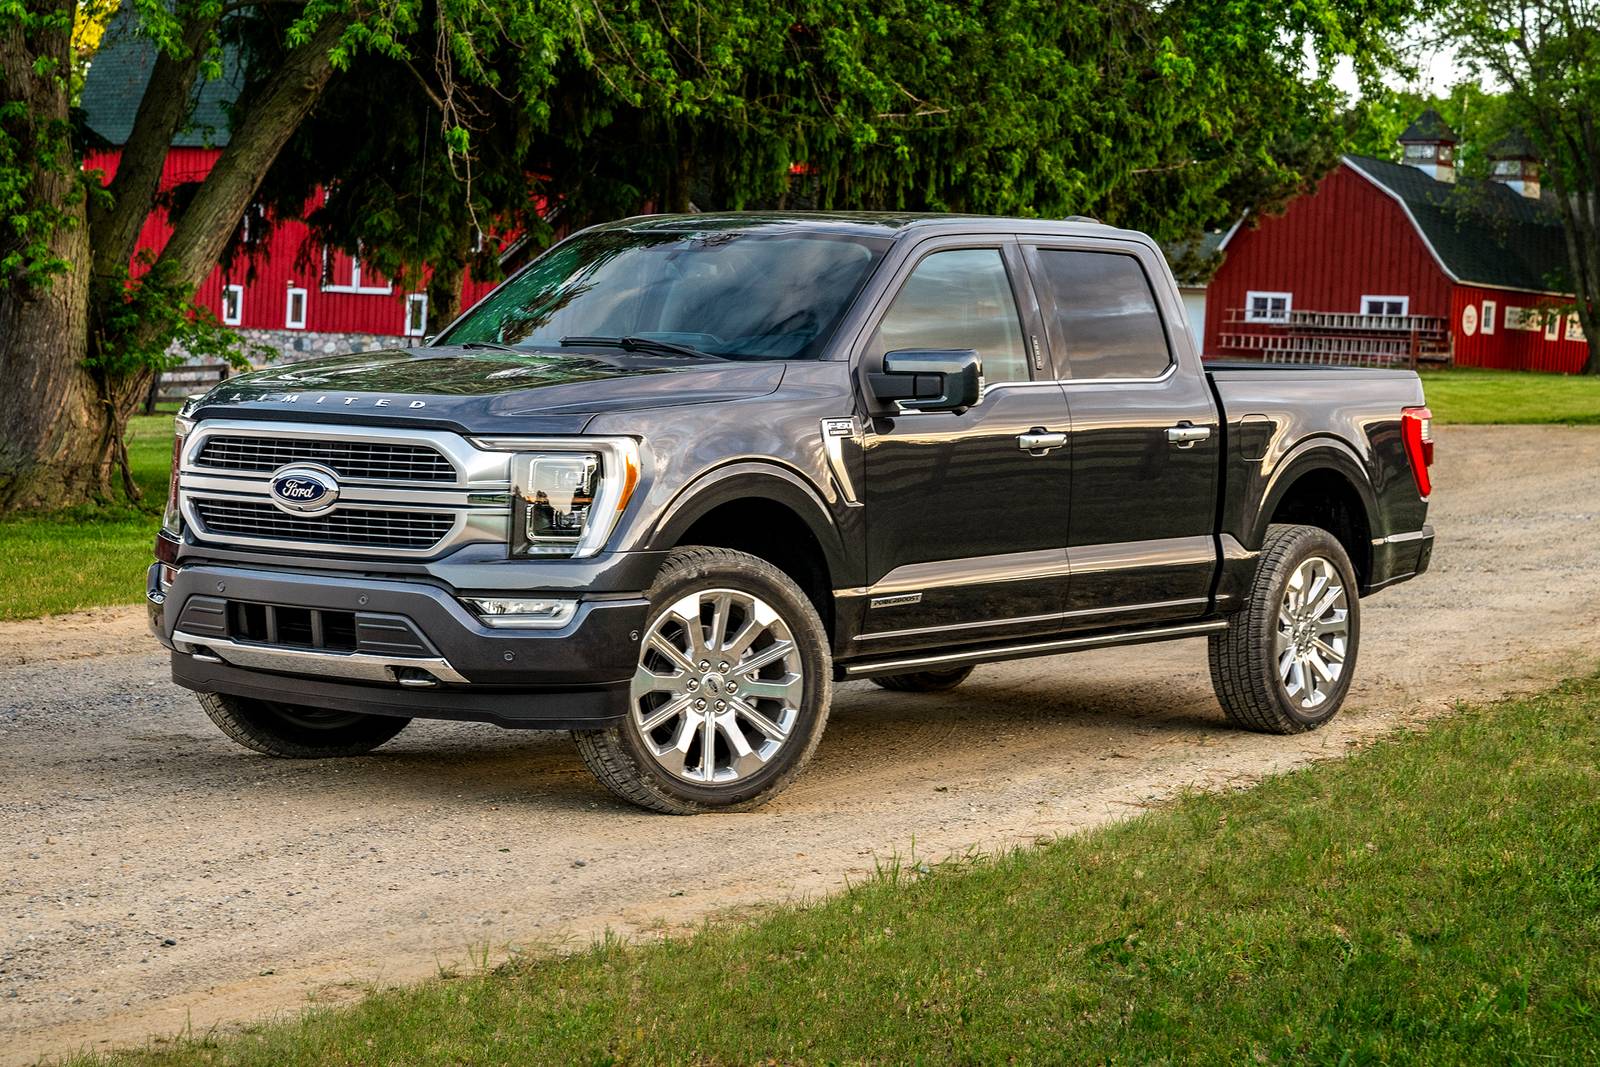 The Ford F-150: Performance And Reliability In One